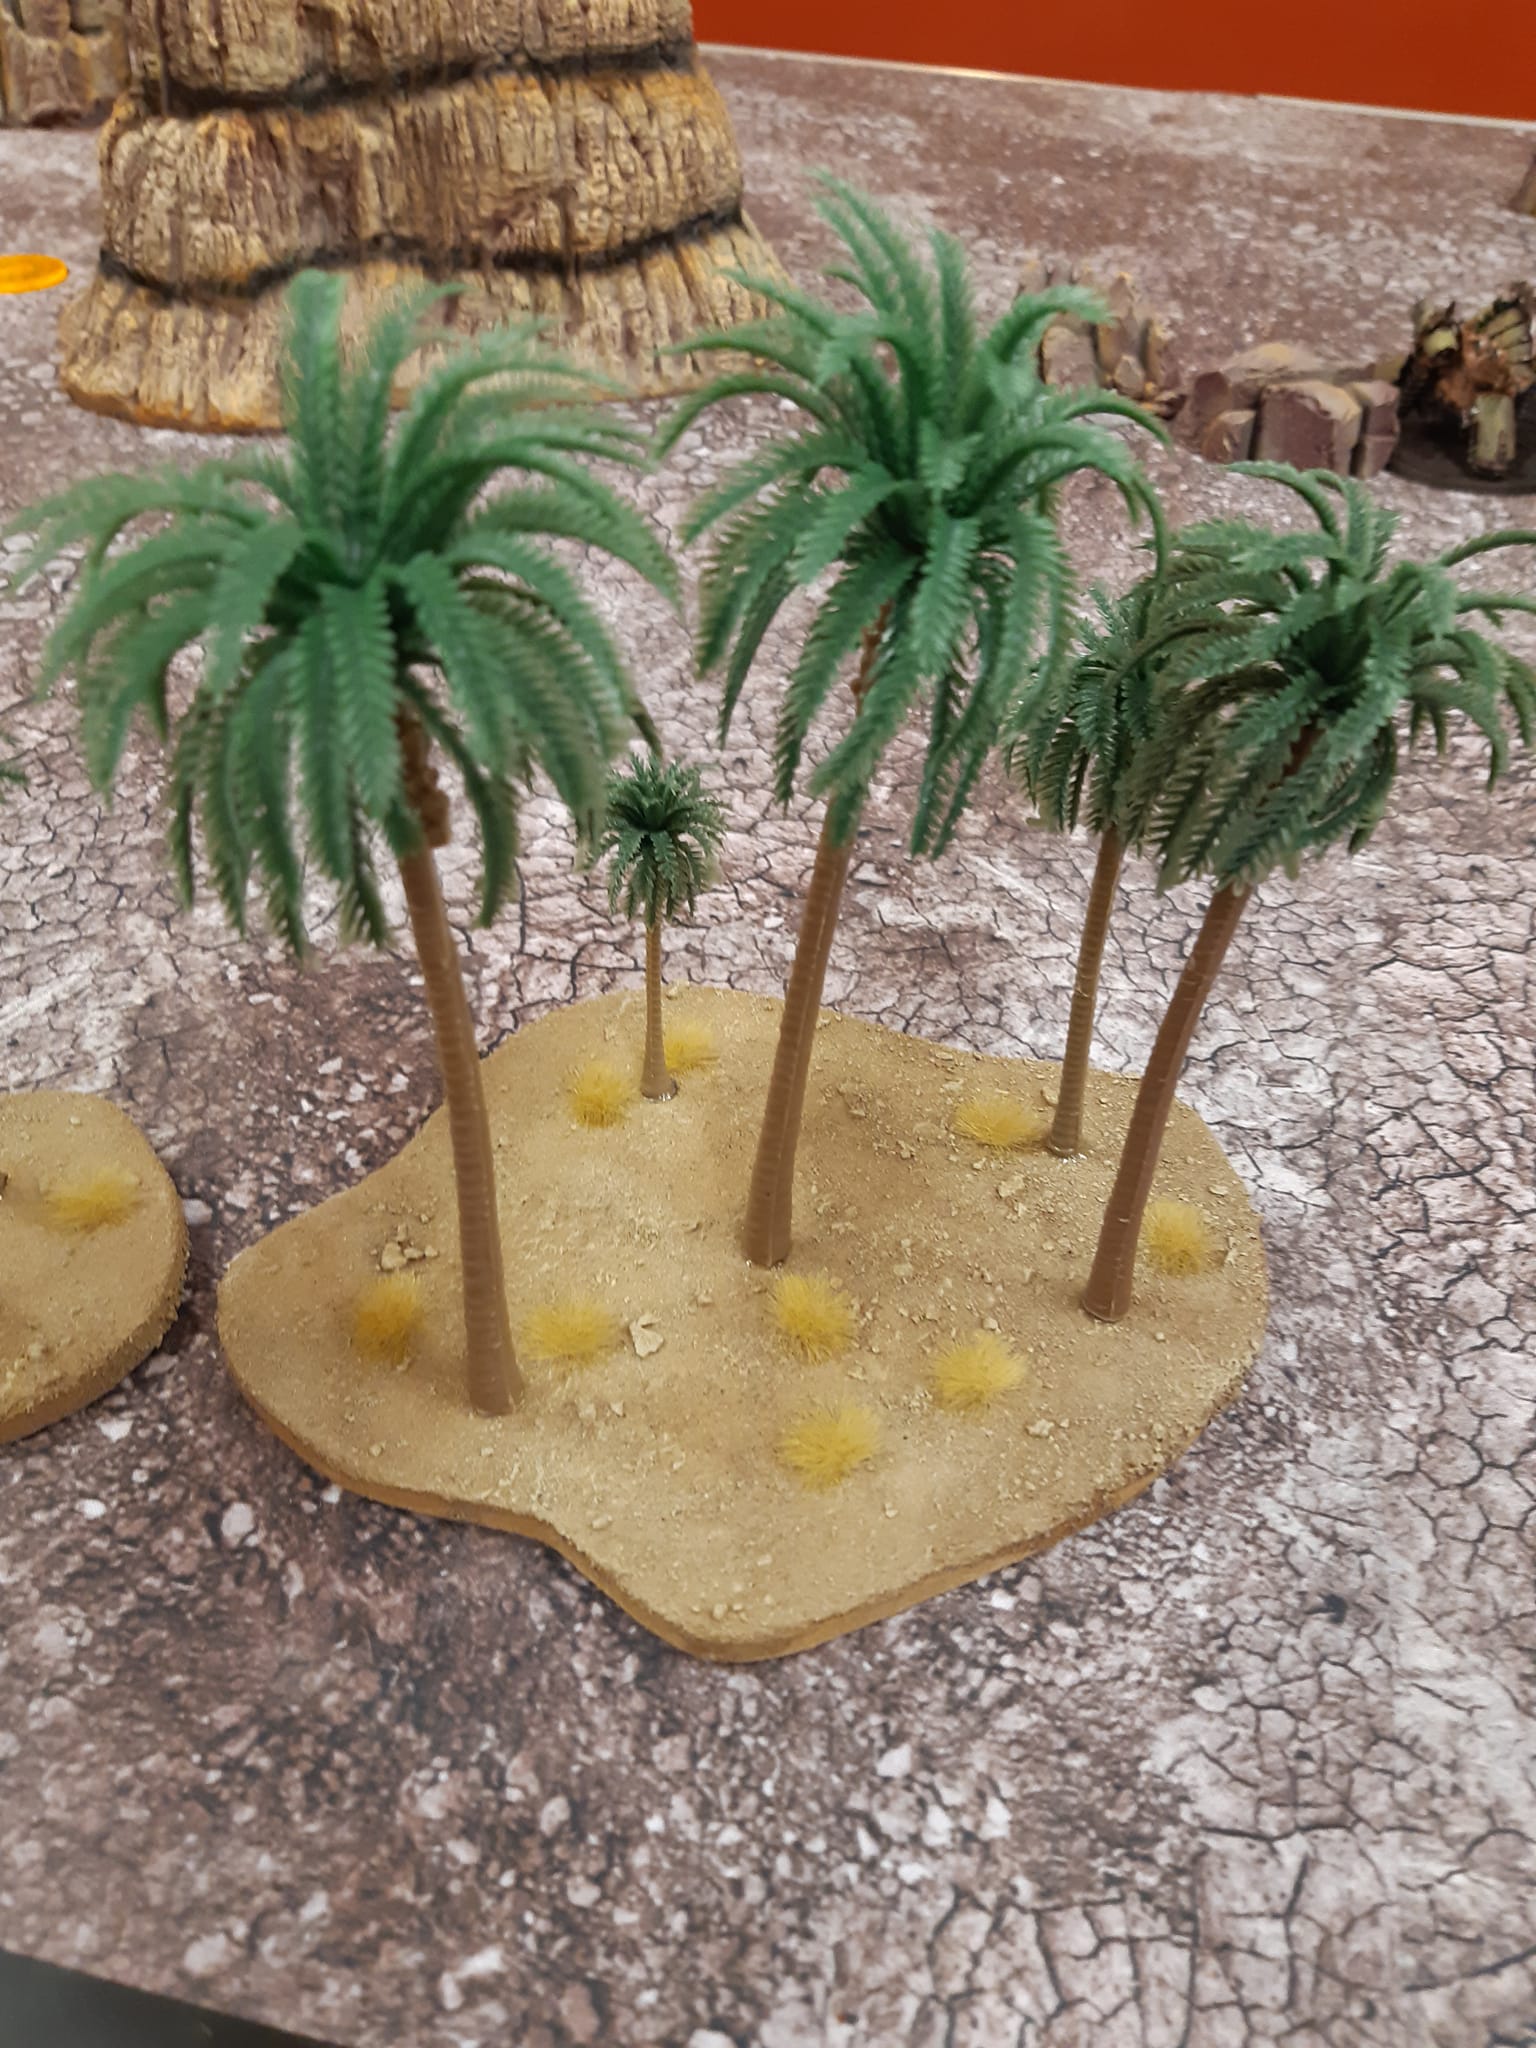 I made some Terrain from sand, water, and glue. What do you think? :  r/Warhammer